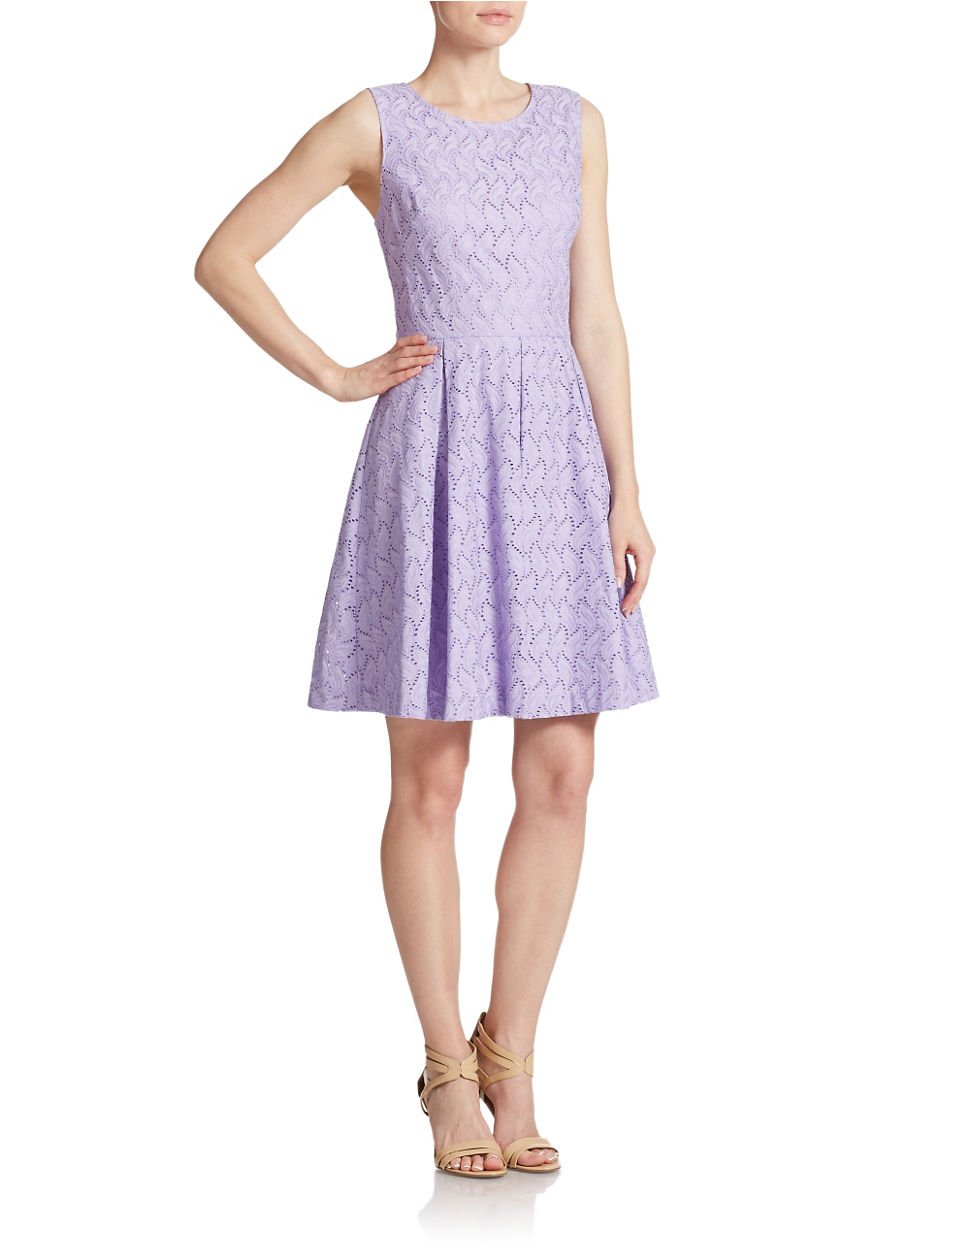 Betsey johnson Eyelet Fit And Flare Dress in Purple | Lyst